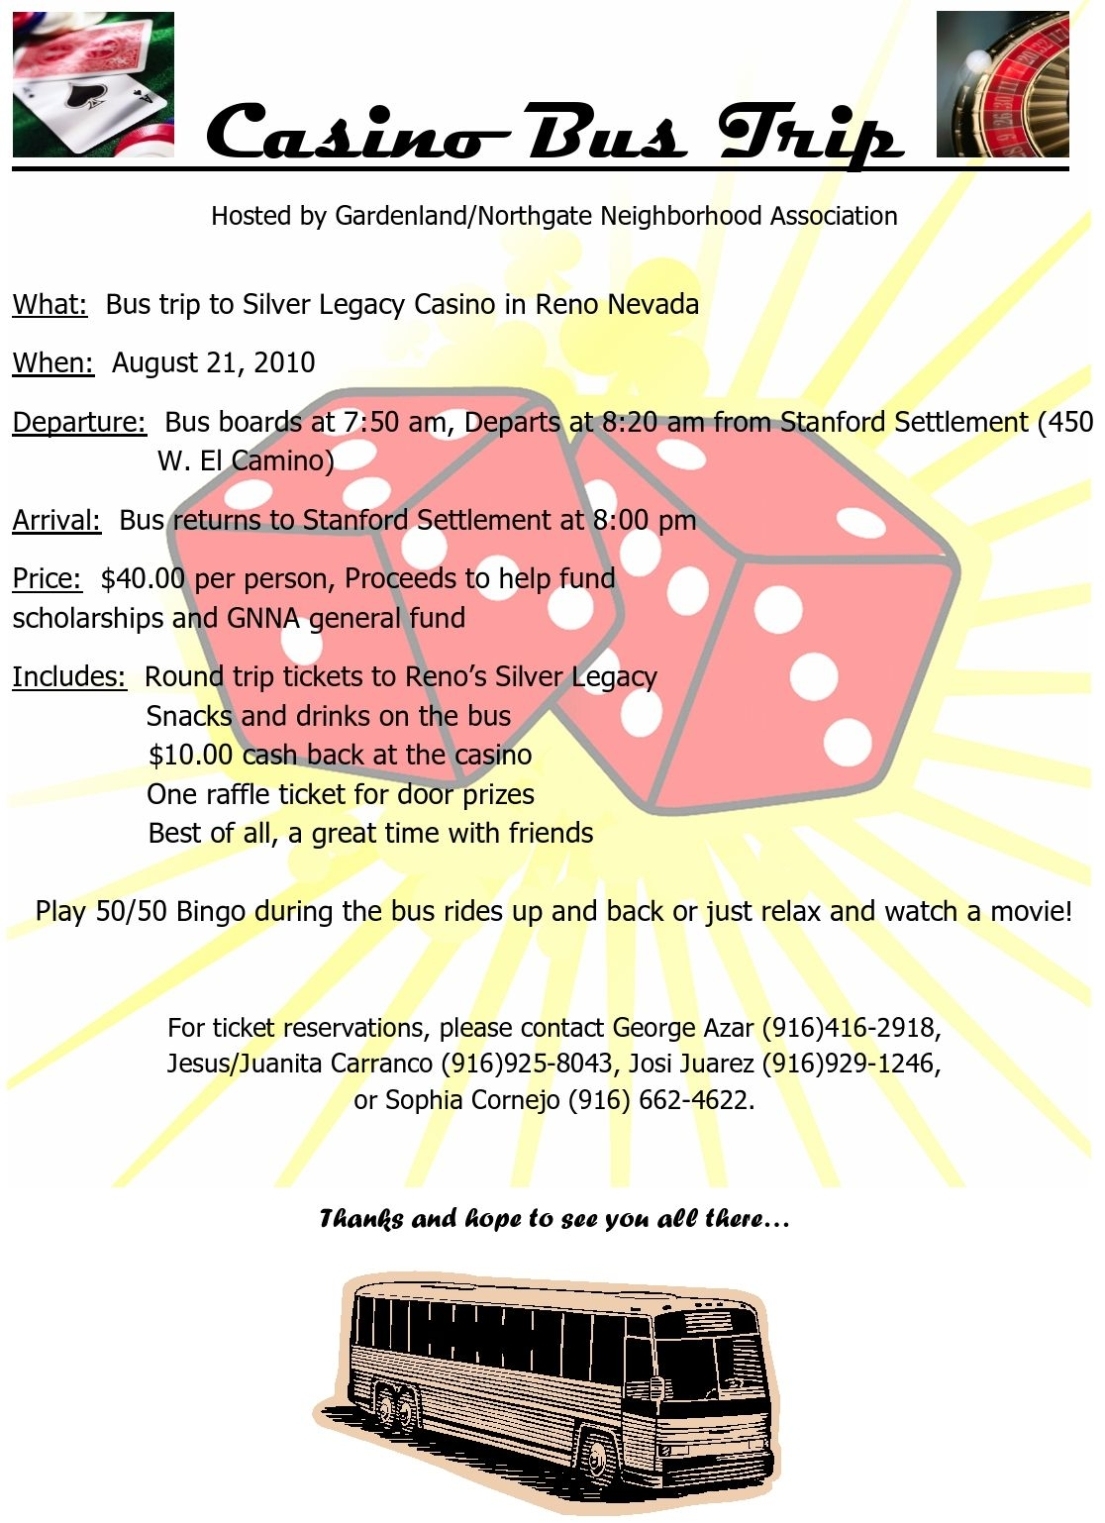 Natomas, Ca - Gardenland/Northgate Group Plans Casino Bus Trip | The Within Bus Trip Flyer Templates Free